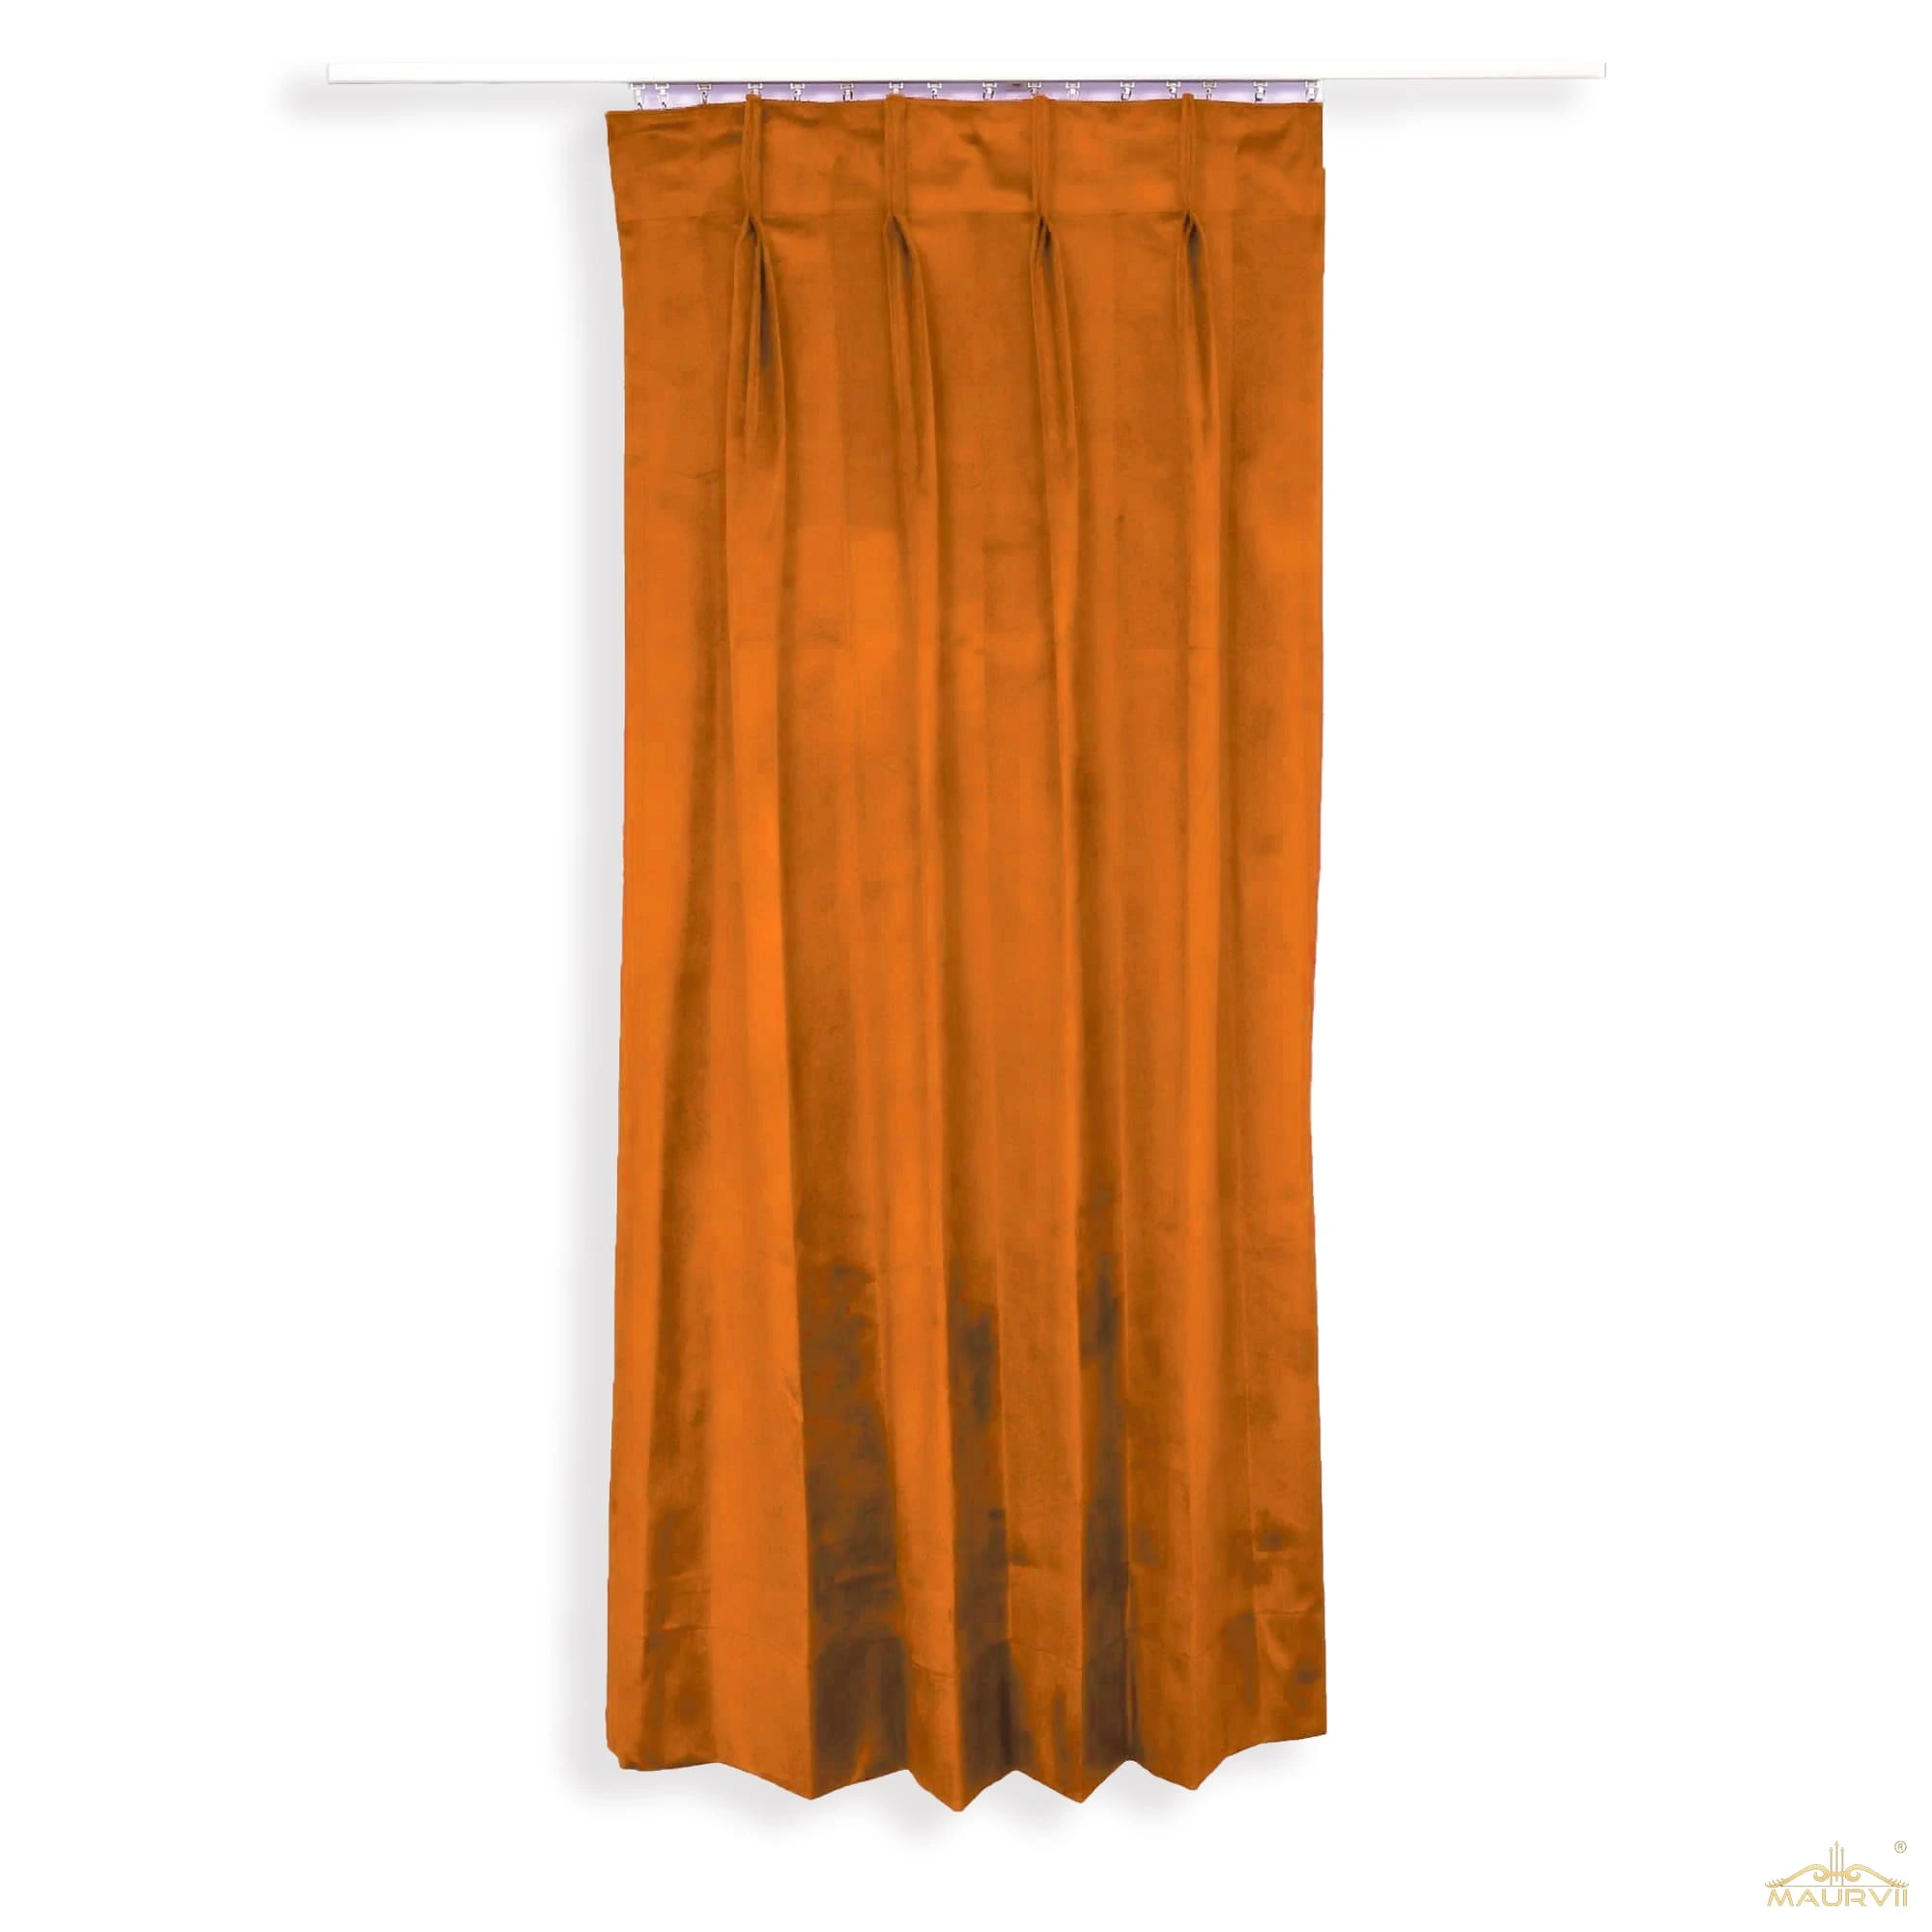 Rust drapes for theater decoration